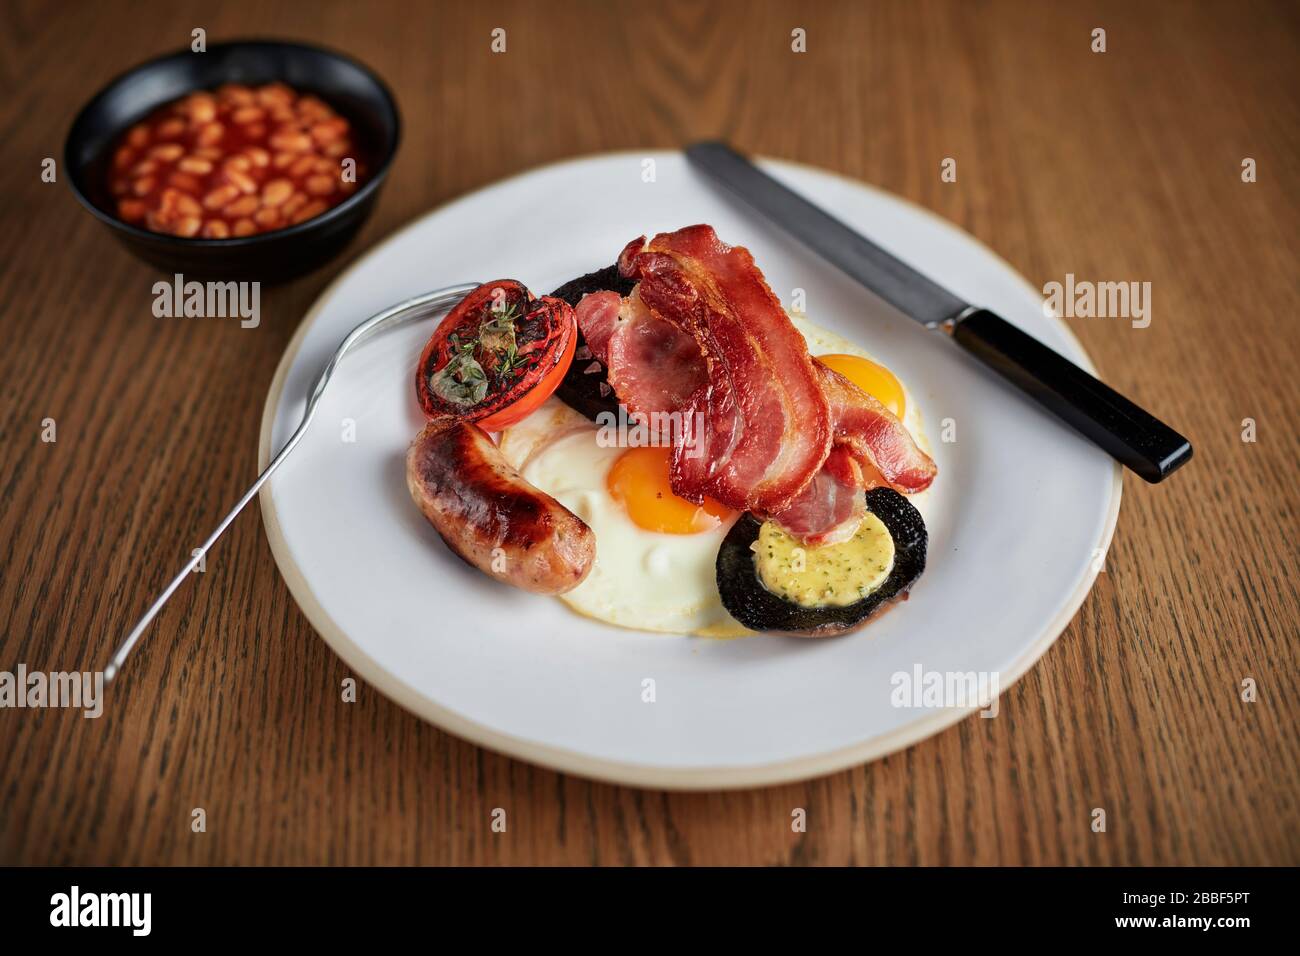 Breakfast fry up Full English sausage egg bacon mushroom beans cafe greasy spoon grill Stock Photo